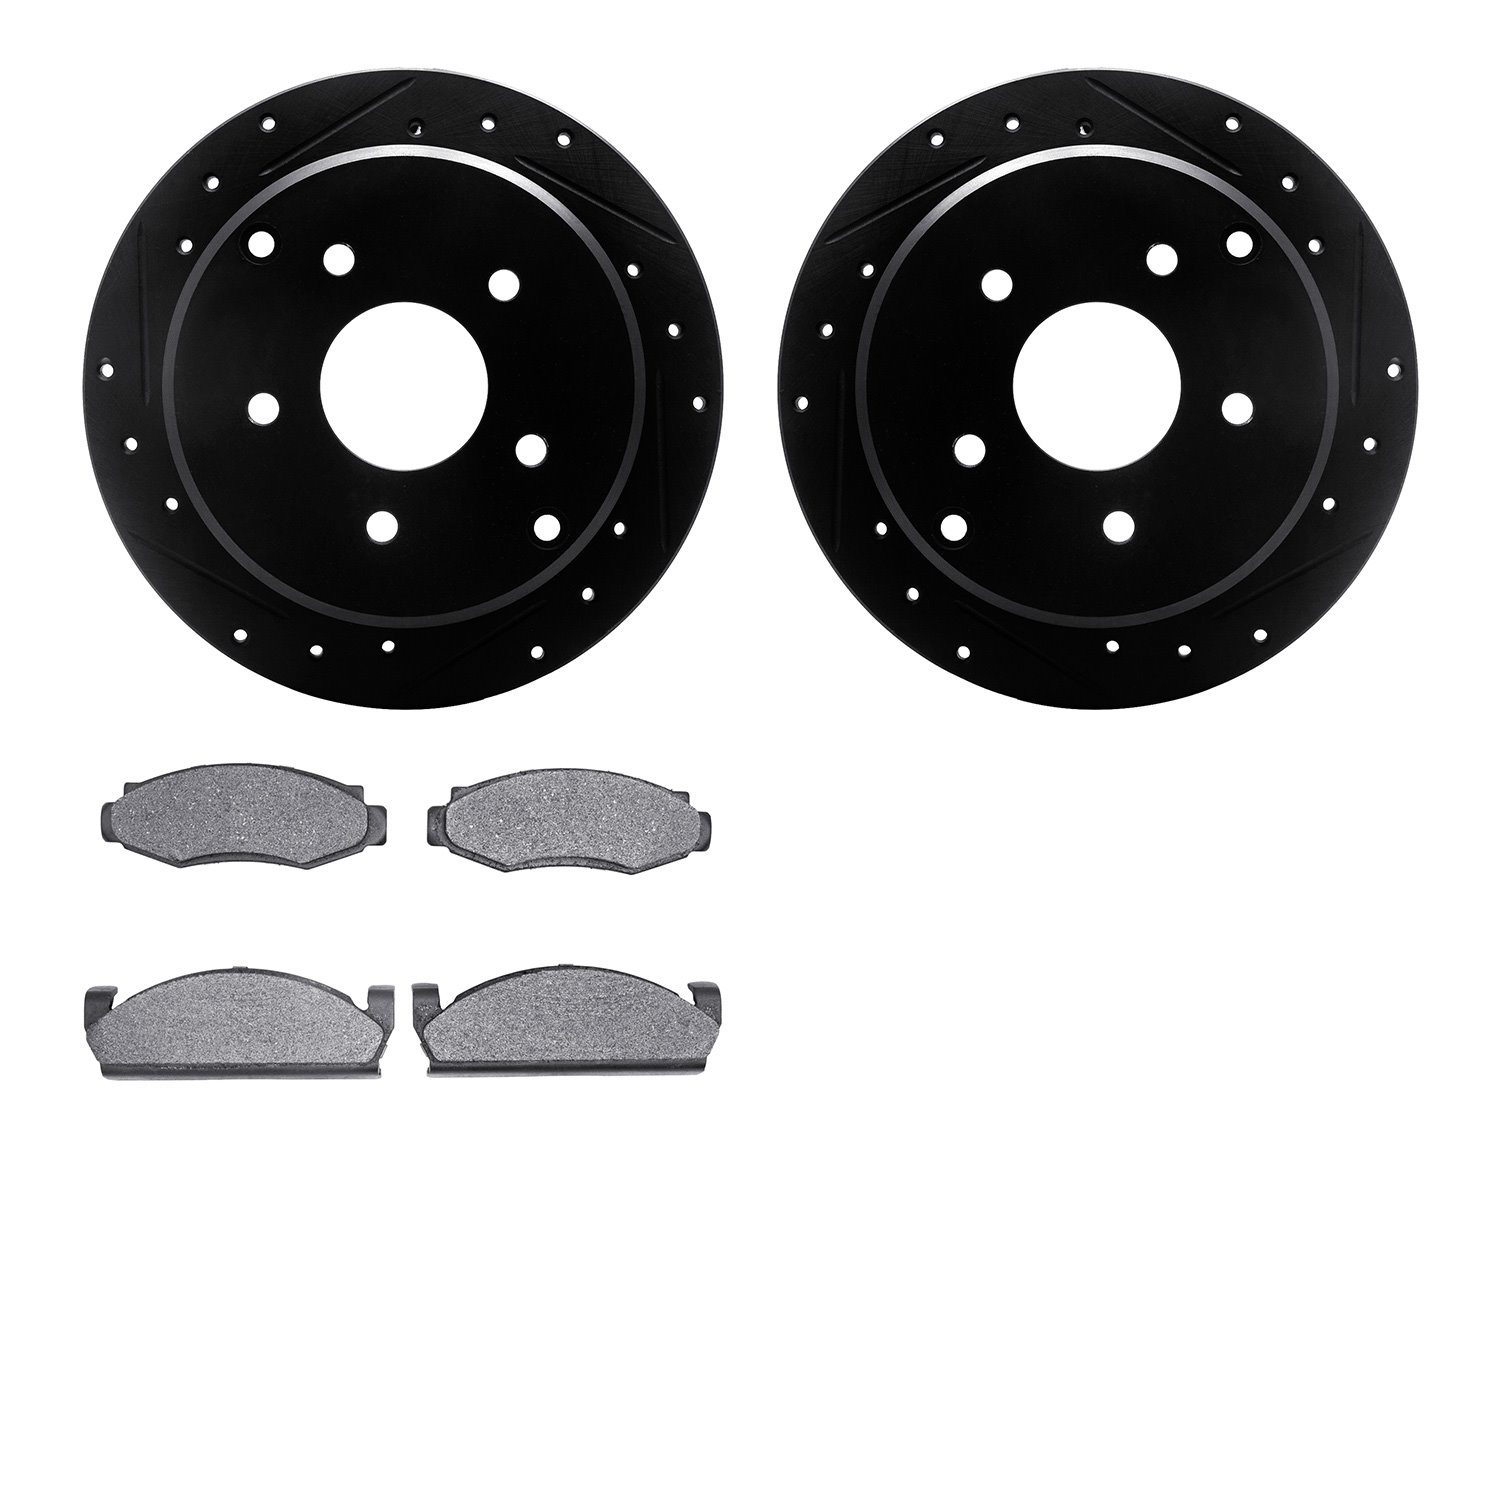 8402-54003 Drilled/Slotted Brake Rotors with Ultimate-Duty Brake Pads Kit [Black], 1974-1980 Ford/Lincoln/Mercury/Mazda, Positio